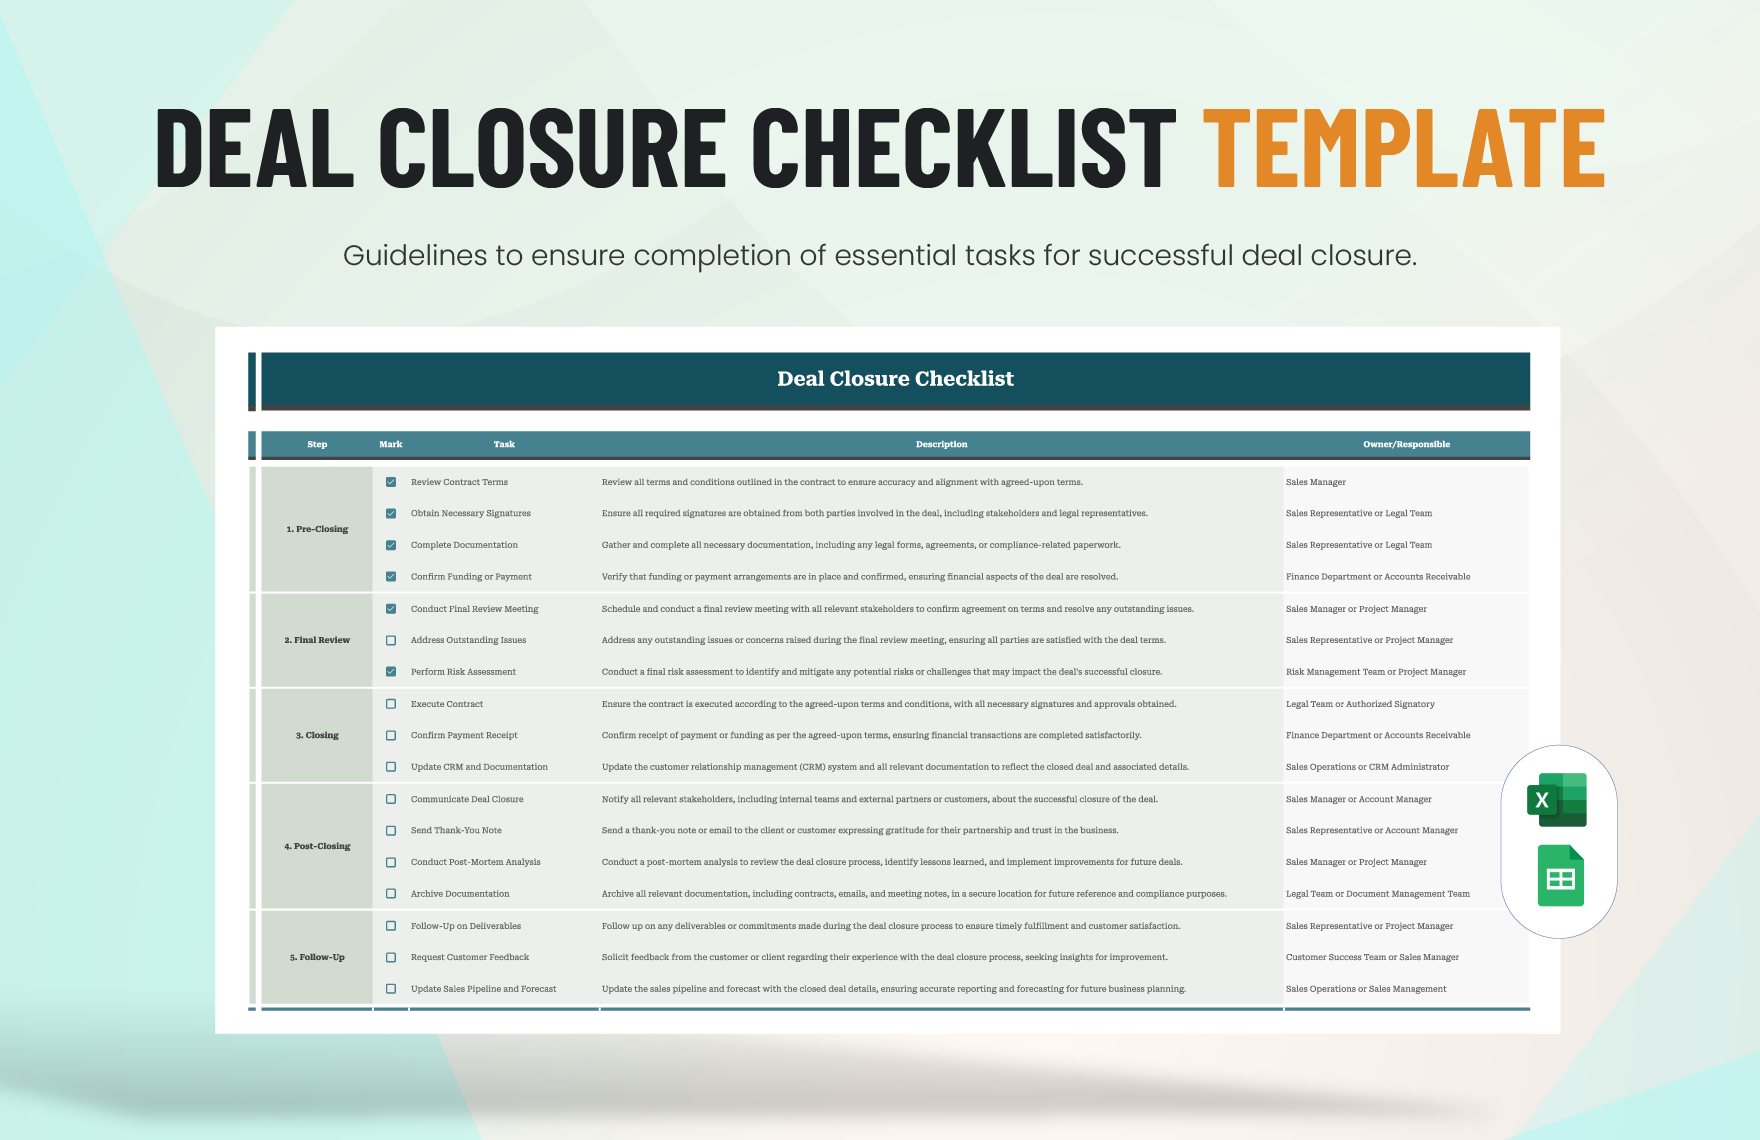 Deal Closure Checklist Template in Excel, Google Sheets